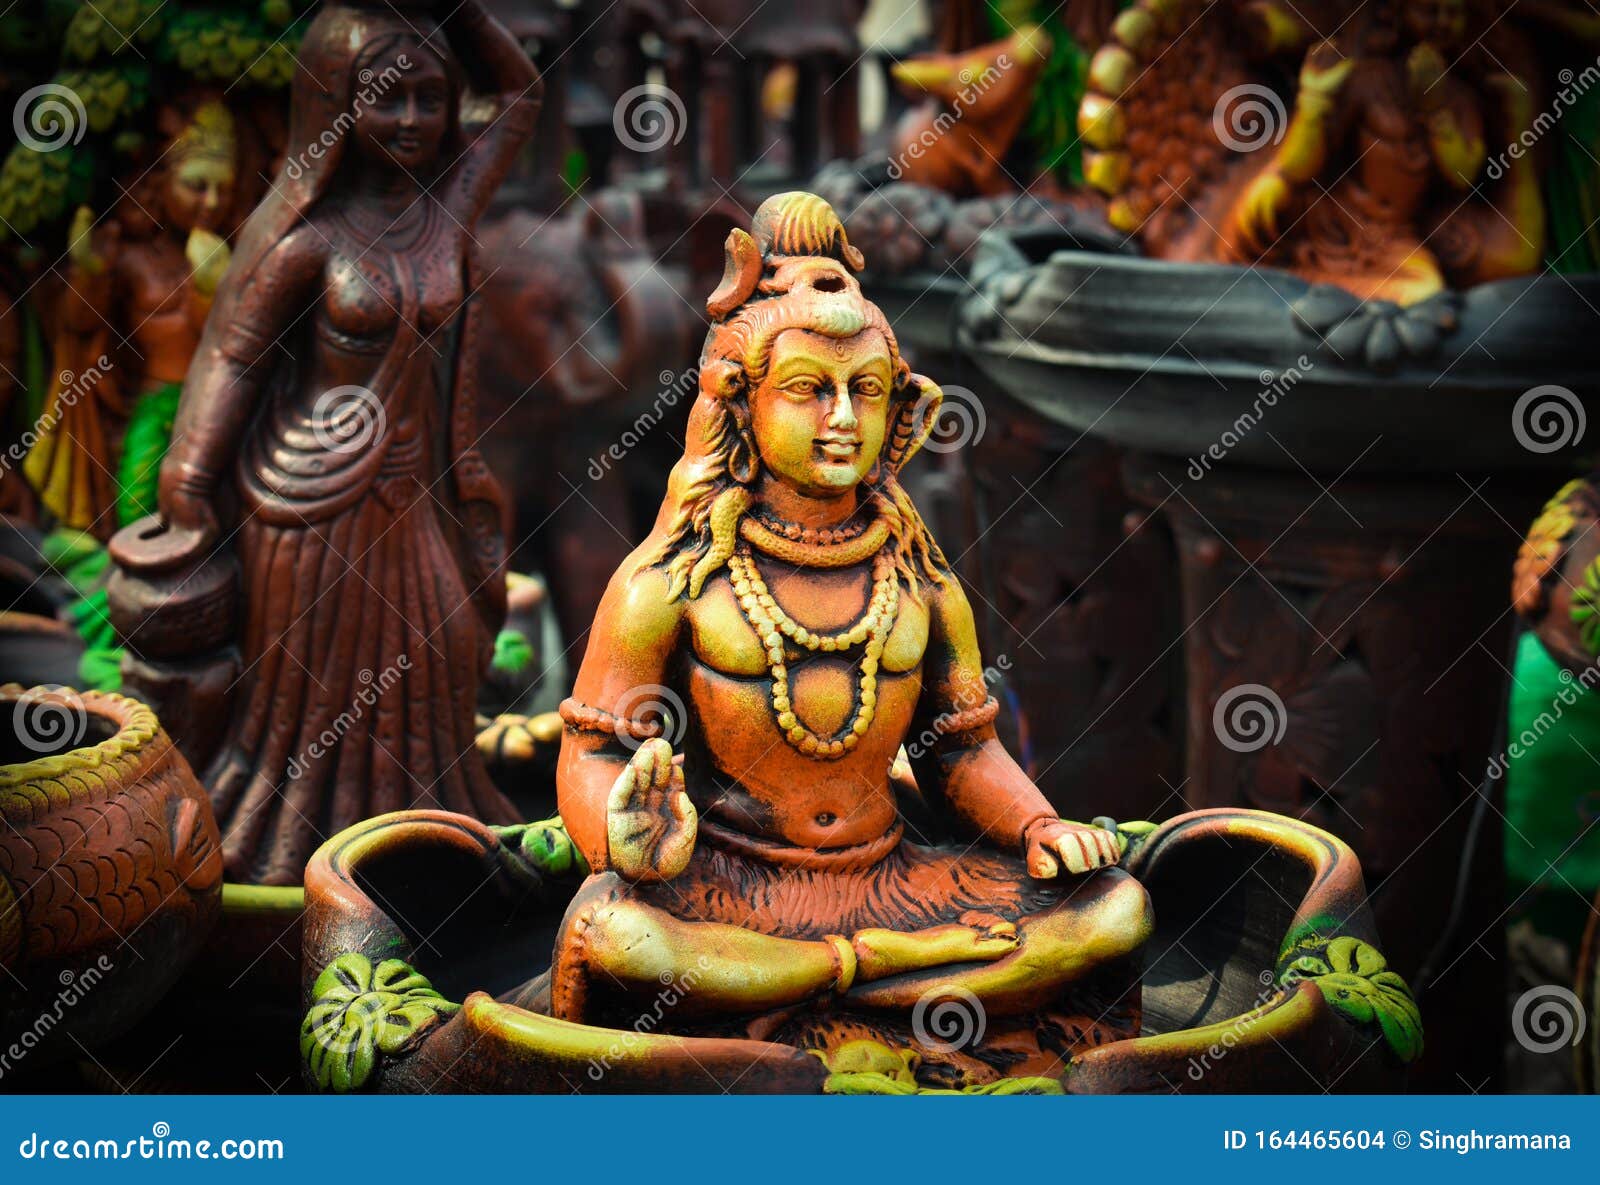 Beautiful View of Portrait of Lord Shiva Stock Photo - Image of ...